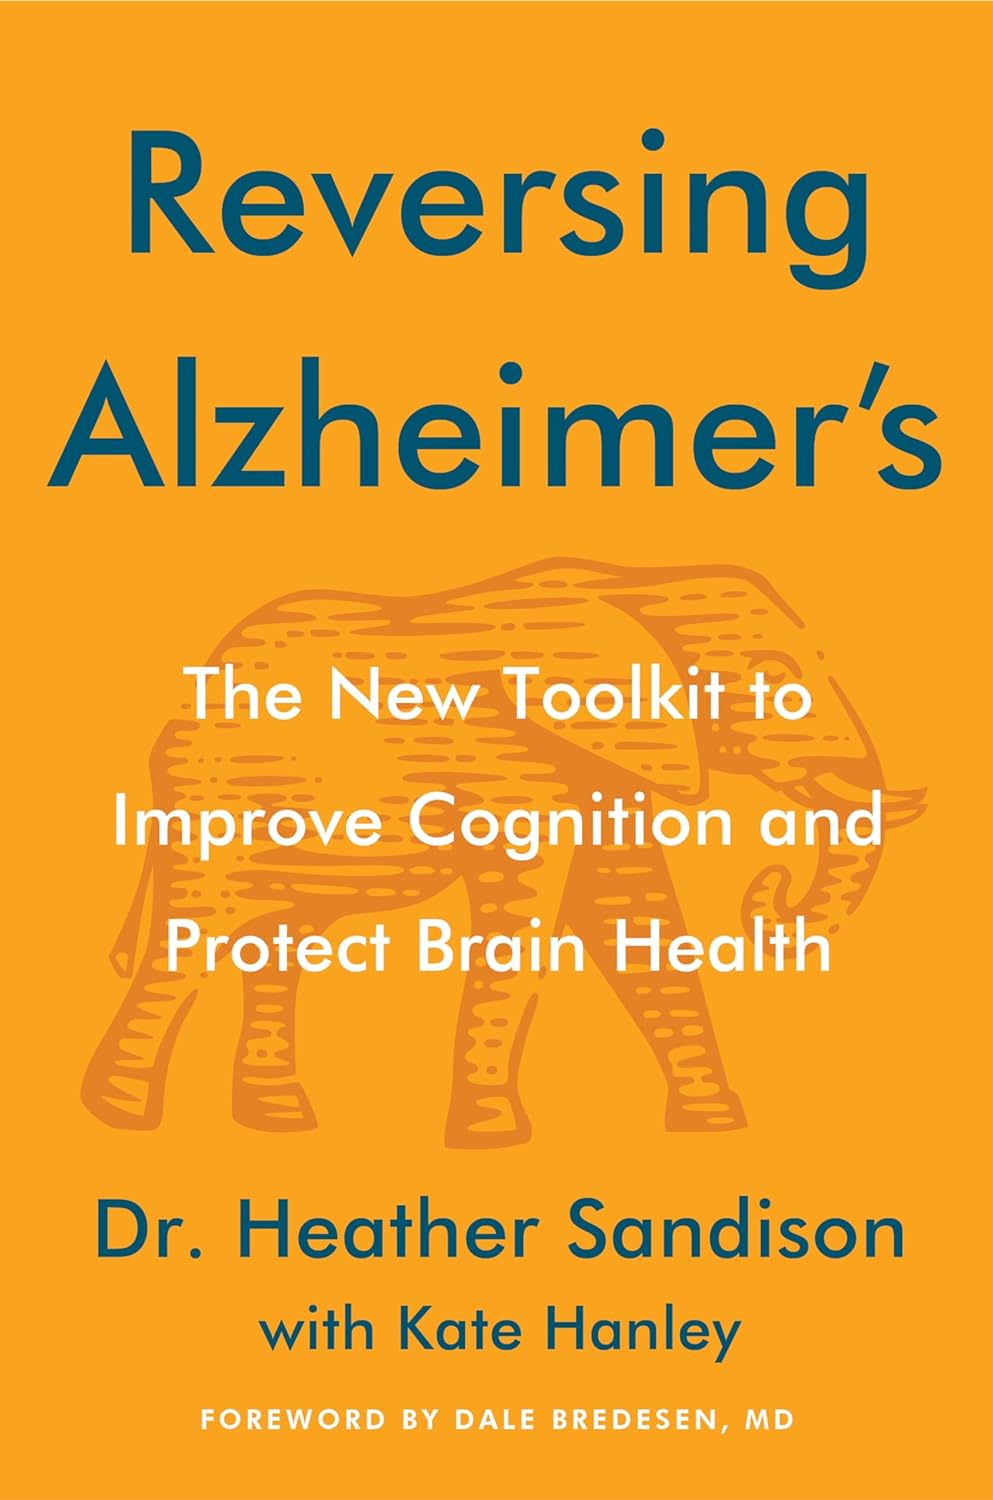 The Chris Voss Show Podcast  Reversing Alzheimers: The New Toolkit to Improve Cognition and Protect Brain Health by Heather Sandison [Video]